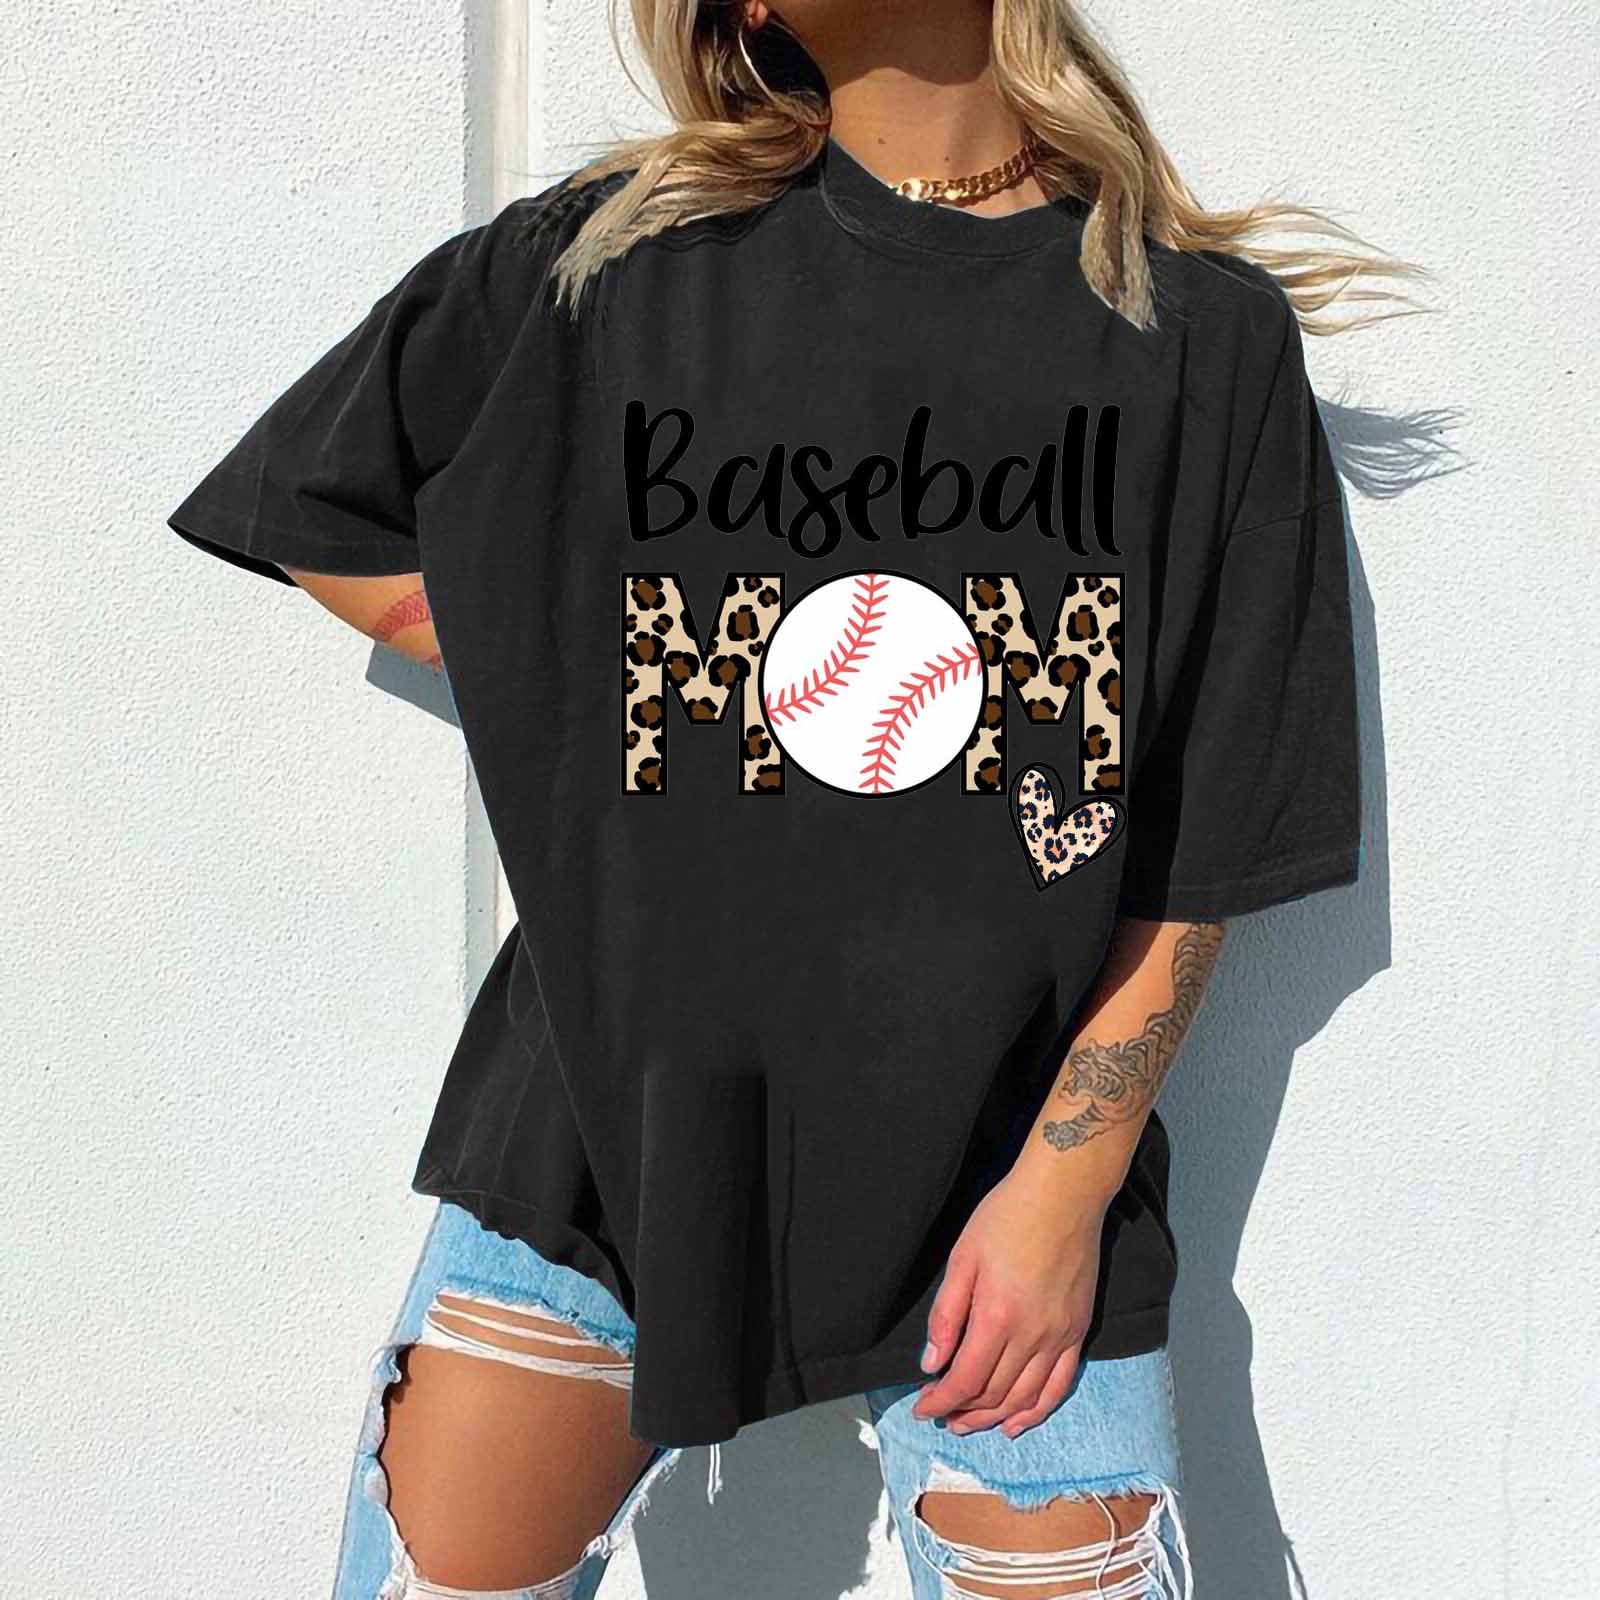 Womens Short Sleeve Crewneck T Shirts,Casual Tops Vintage Graphic T-Shirt Fashion Tees Plus Size Summer Tunic Blouses 